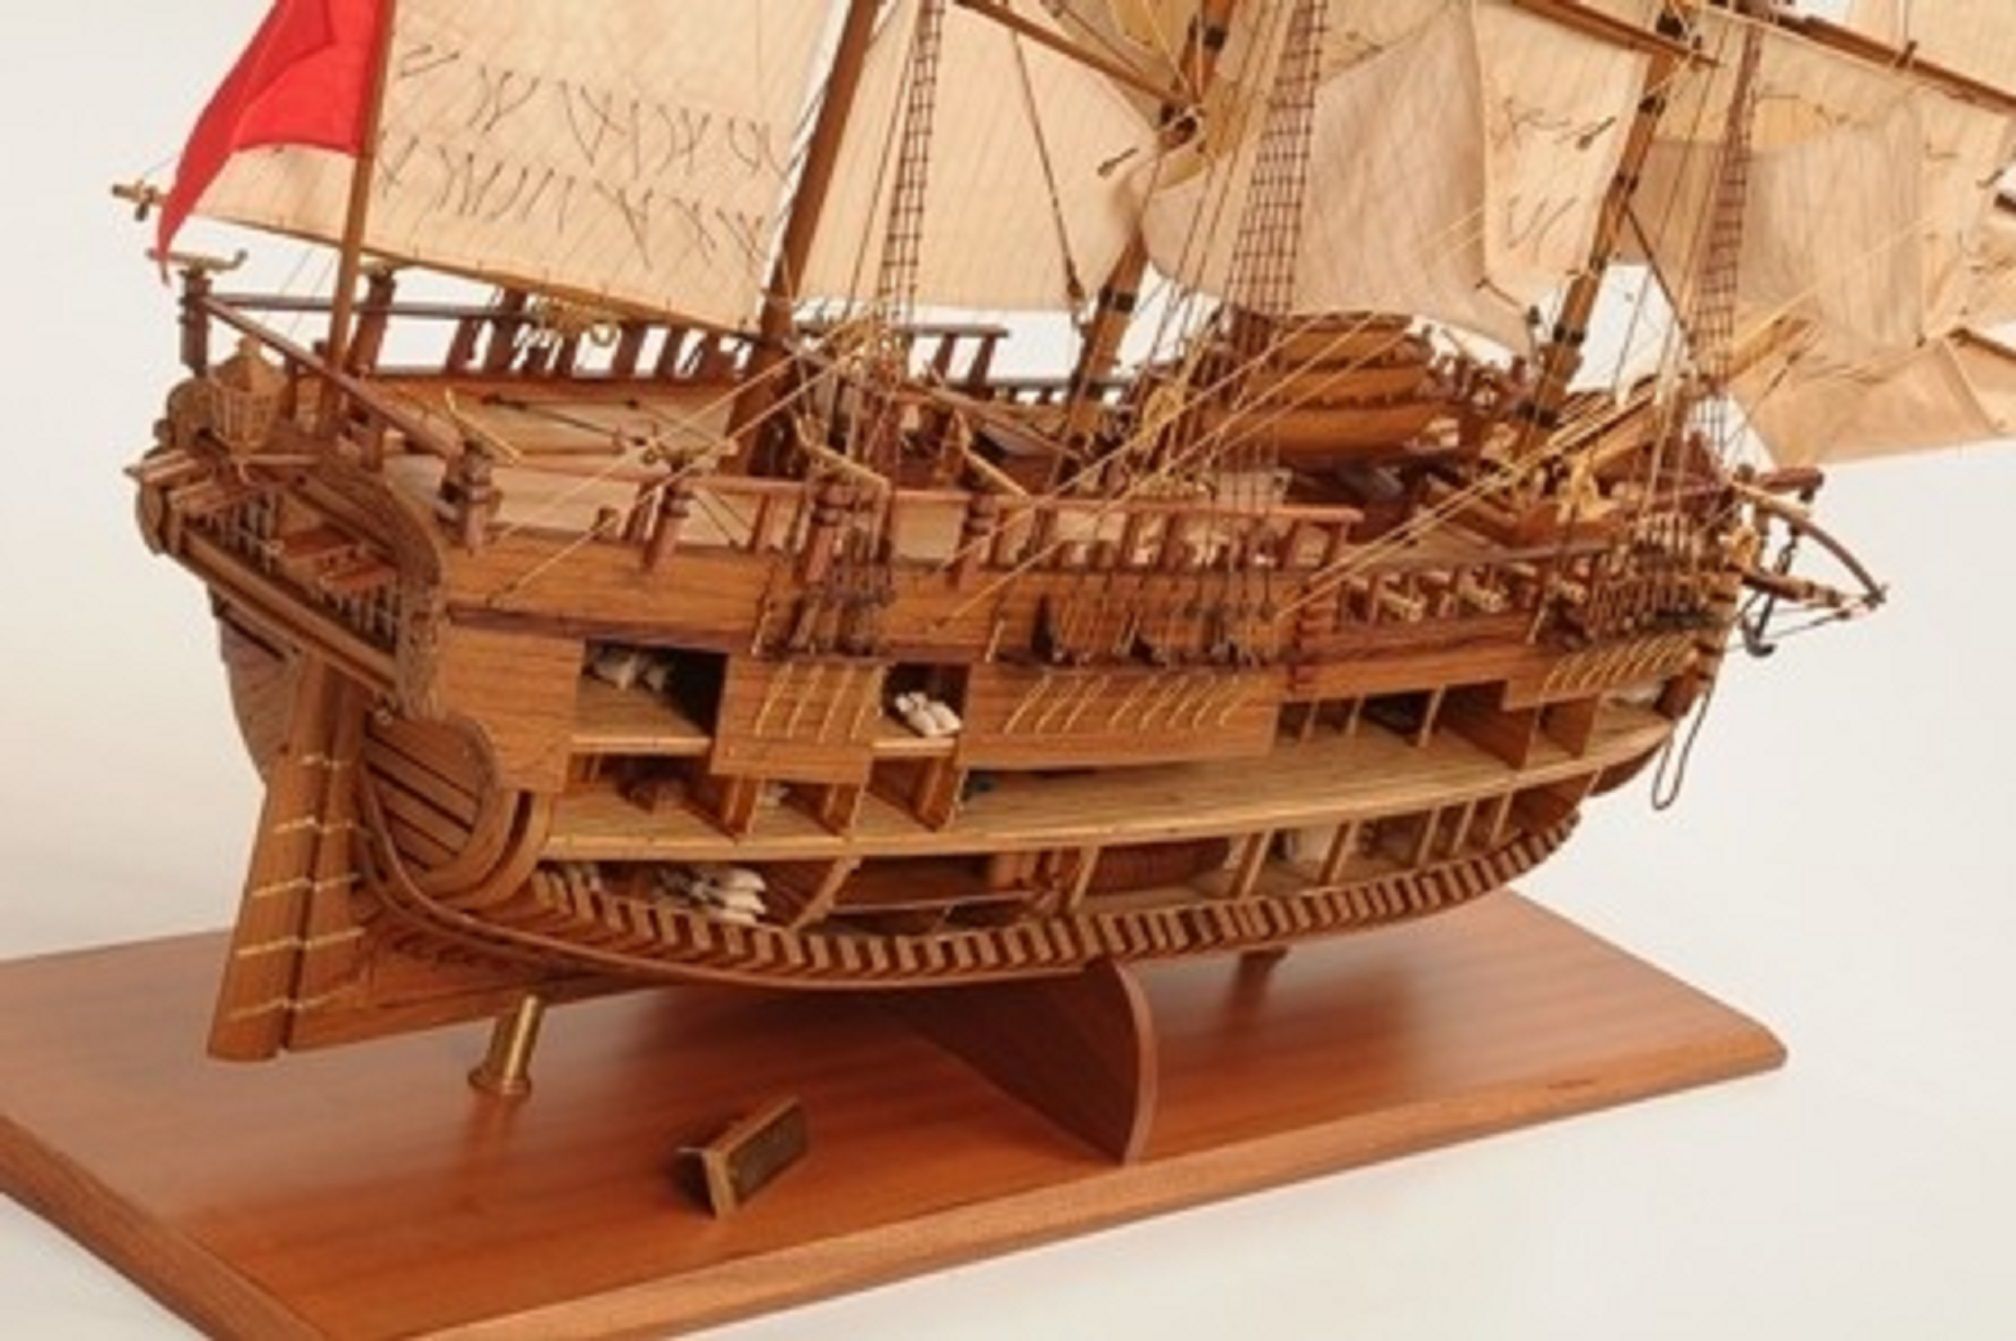 Hms Endeavour Open Hull Model Ship Handcrafted Wooden Ready Made Free